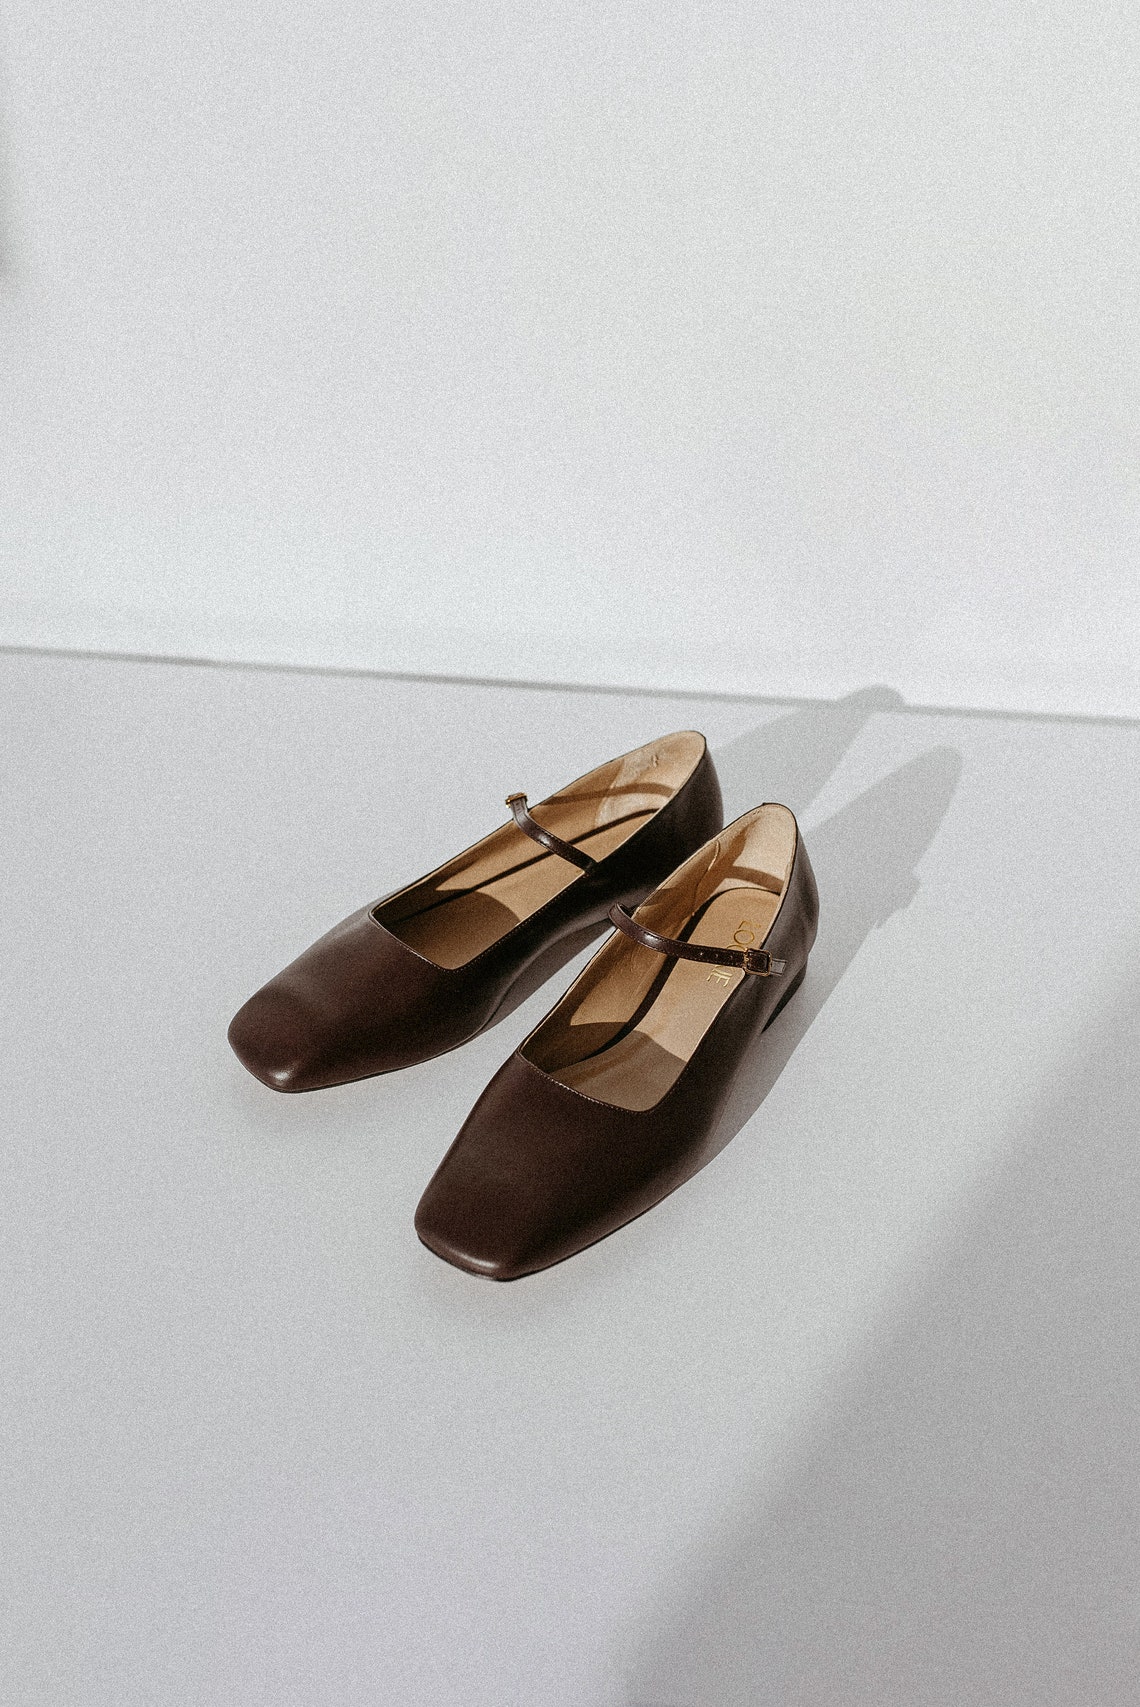 Brown Leather Mary Janes Genuine Leather Flats With Square - Etsy